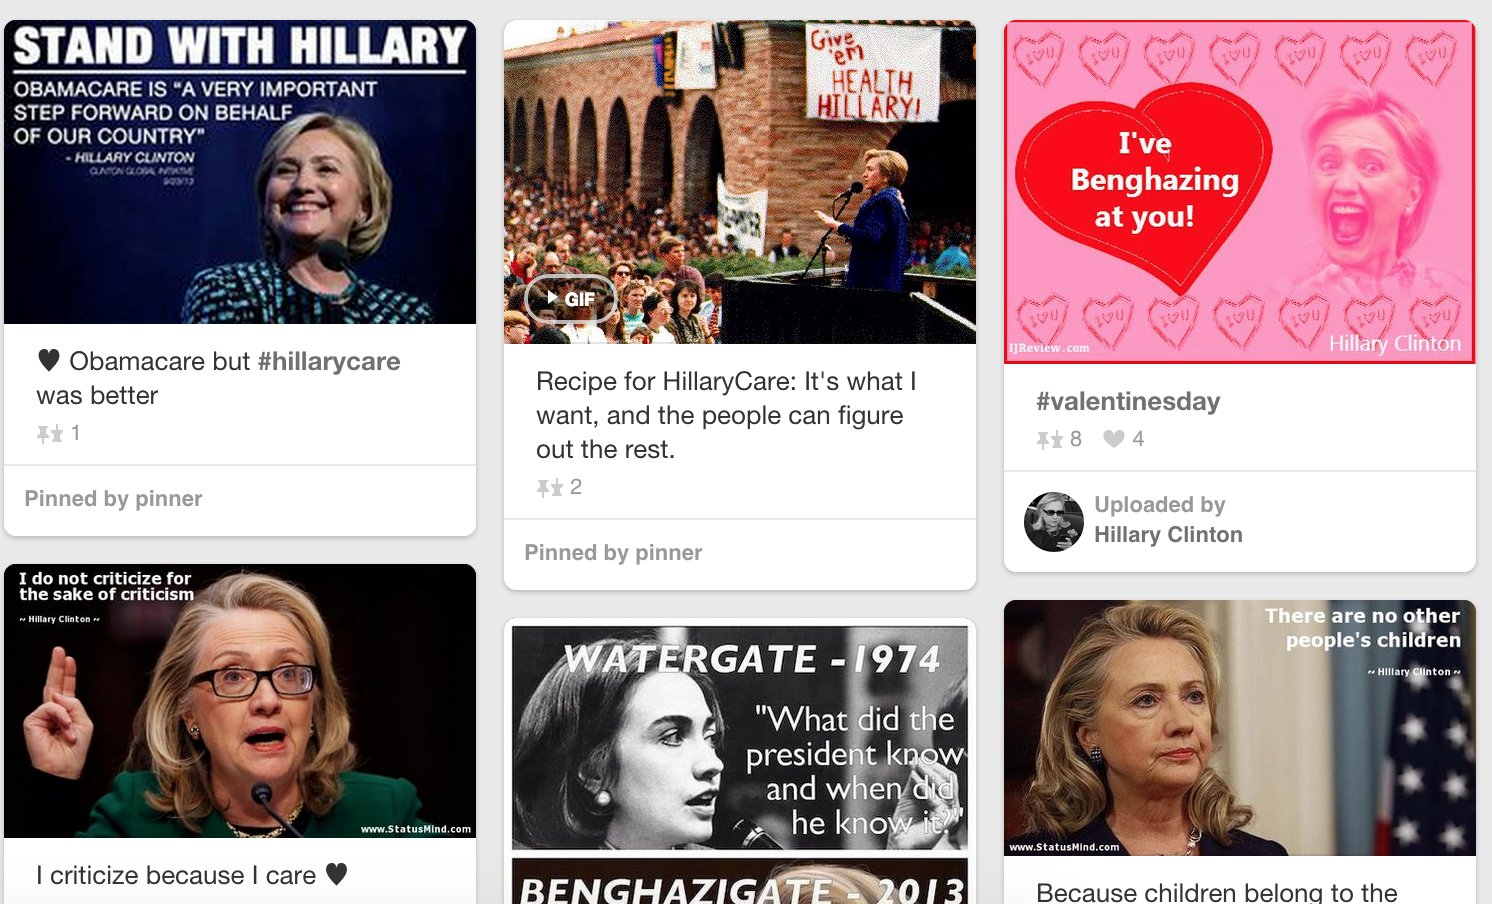 A fake Hillary Clinton Pinterest page